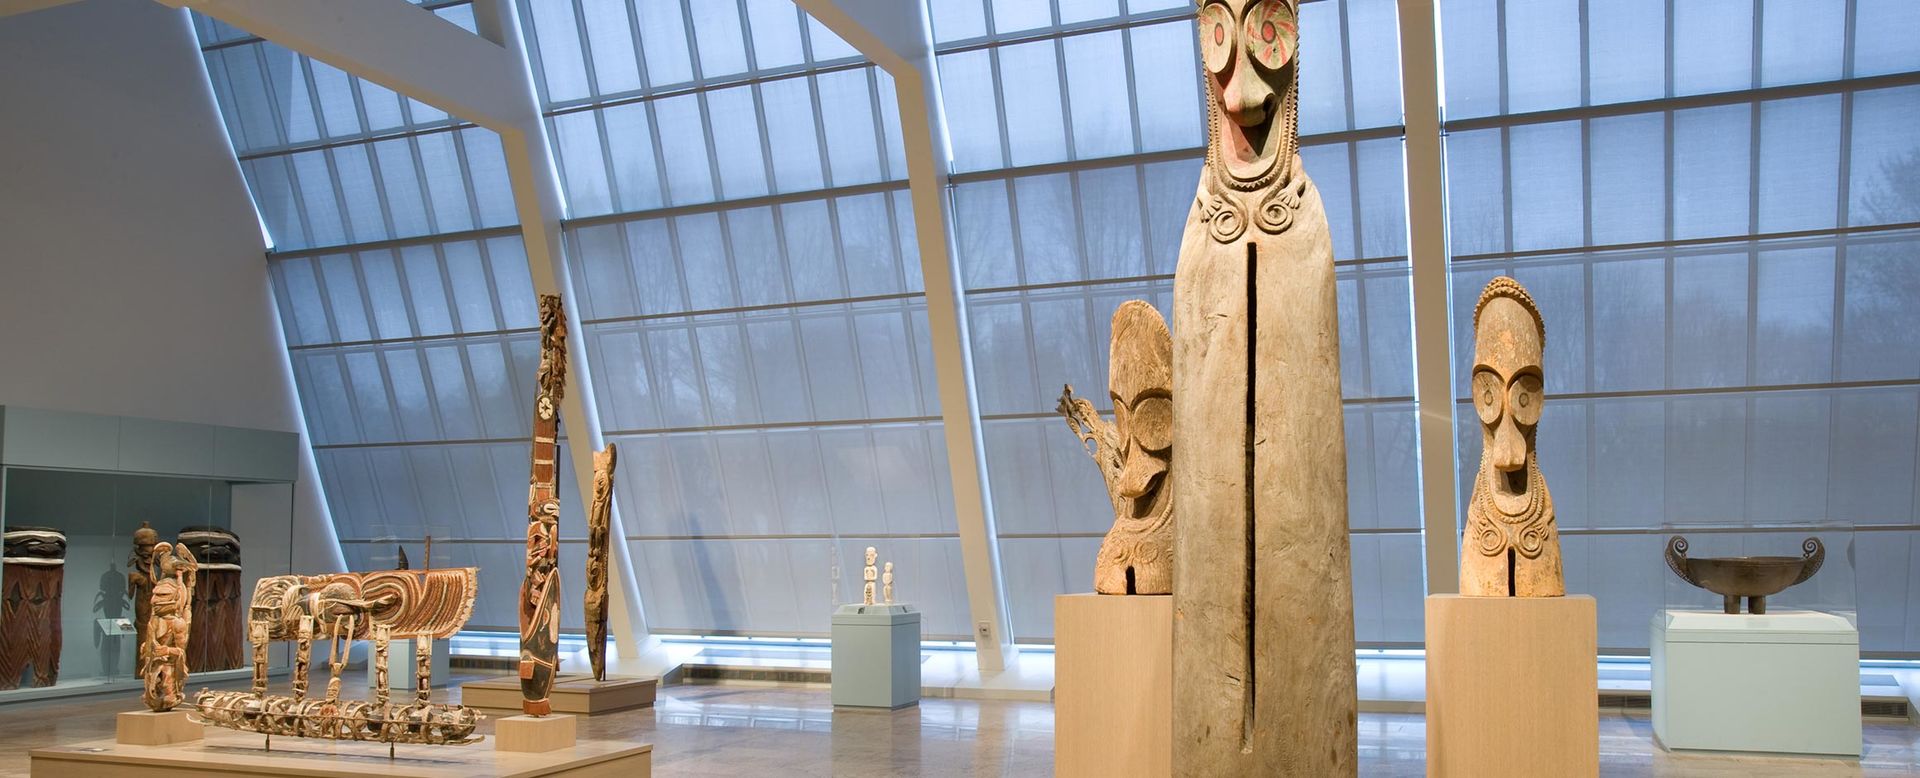 A large open gallery with a wall of windows; in the foreground is one very tall and two smaller wooden sculptures from Oceania